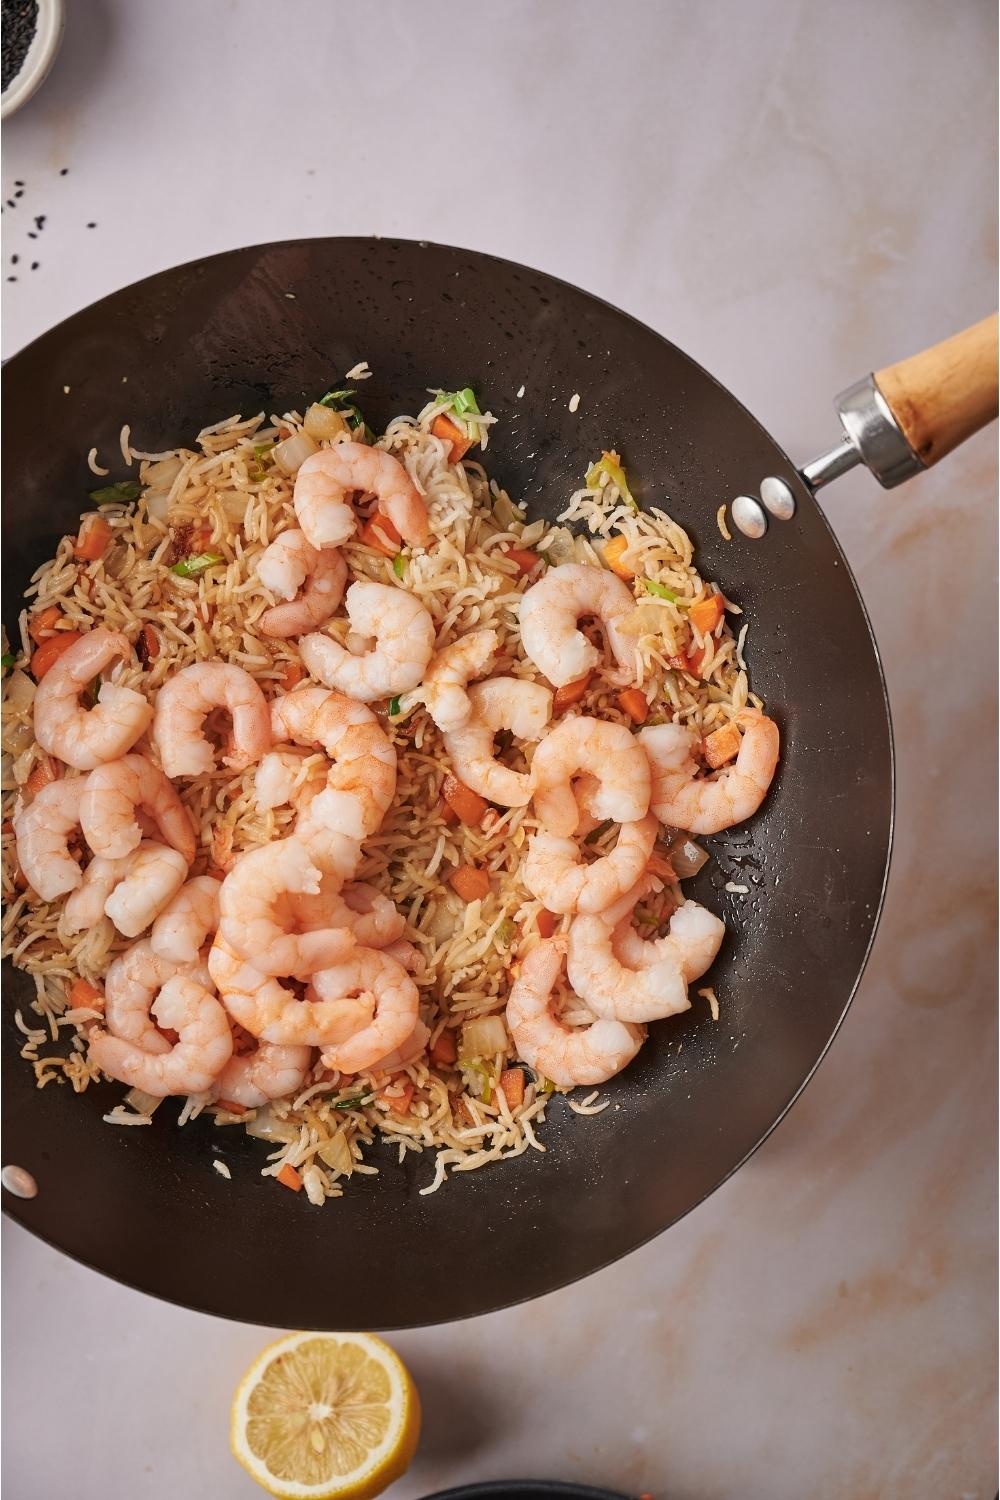 A skillet on a grey counter with Benihana fried rice and cooked shrimp freshly added with a lemon half next to the skillet.